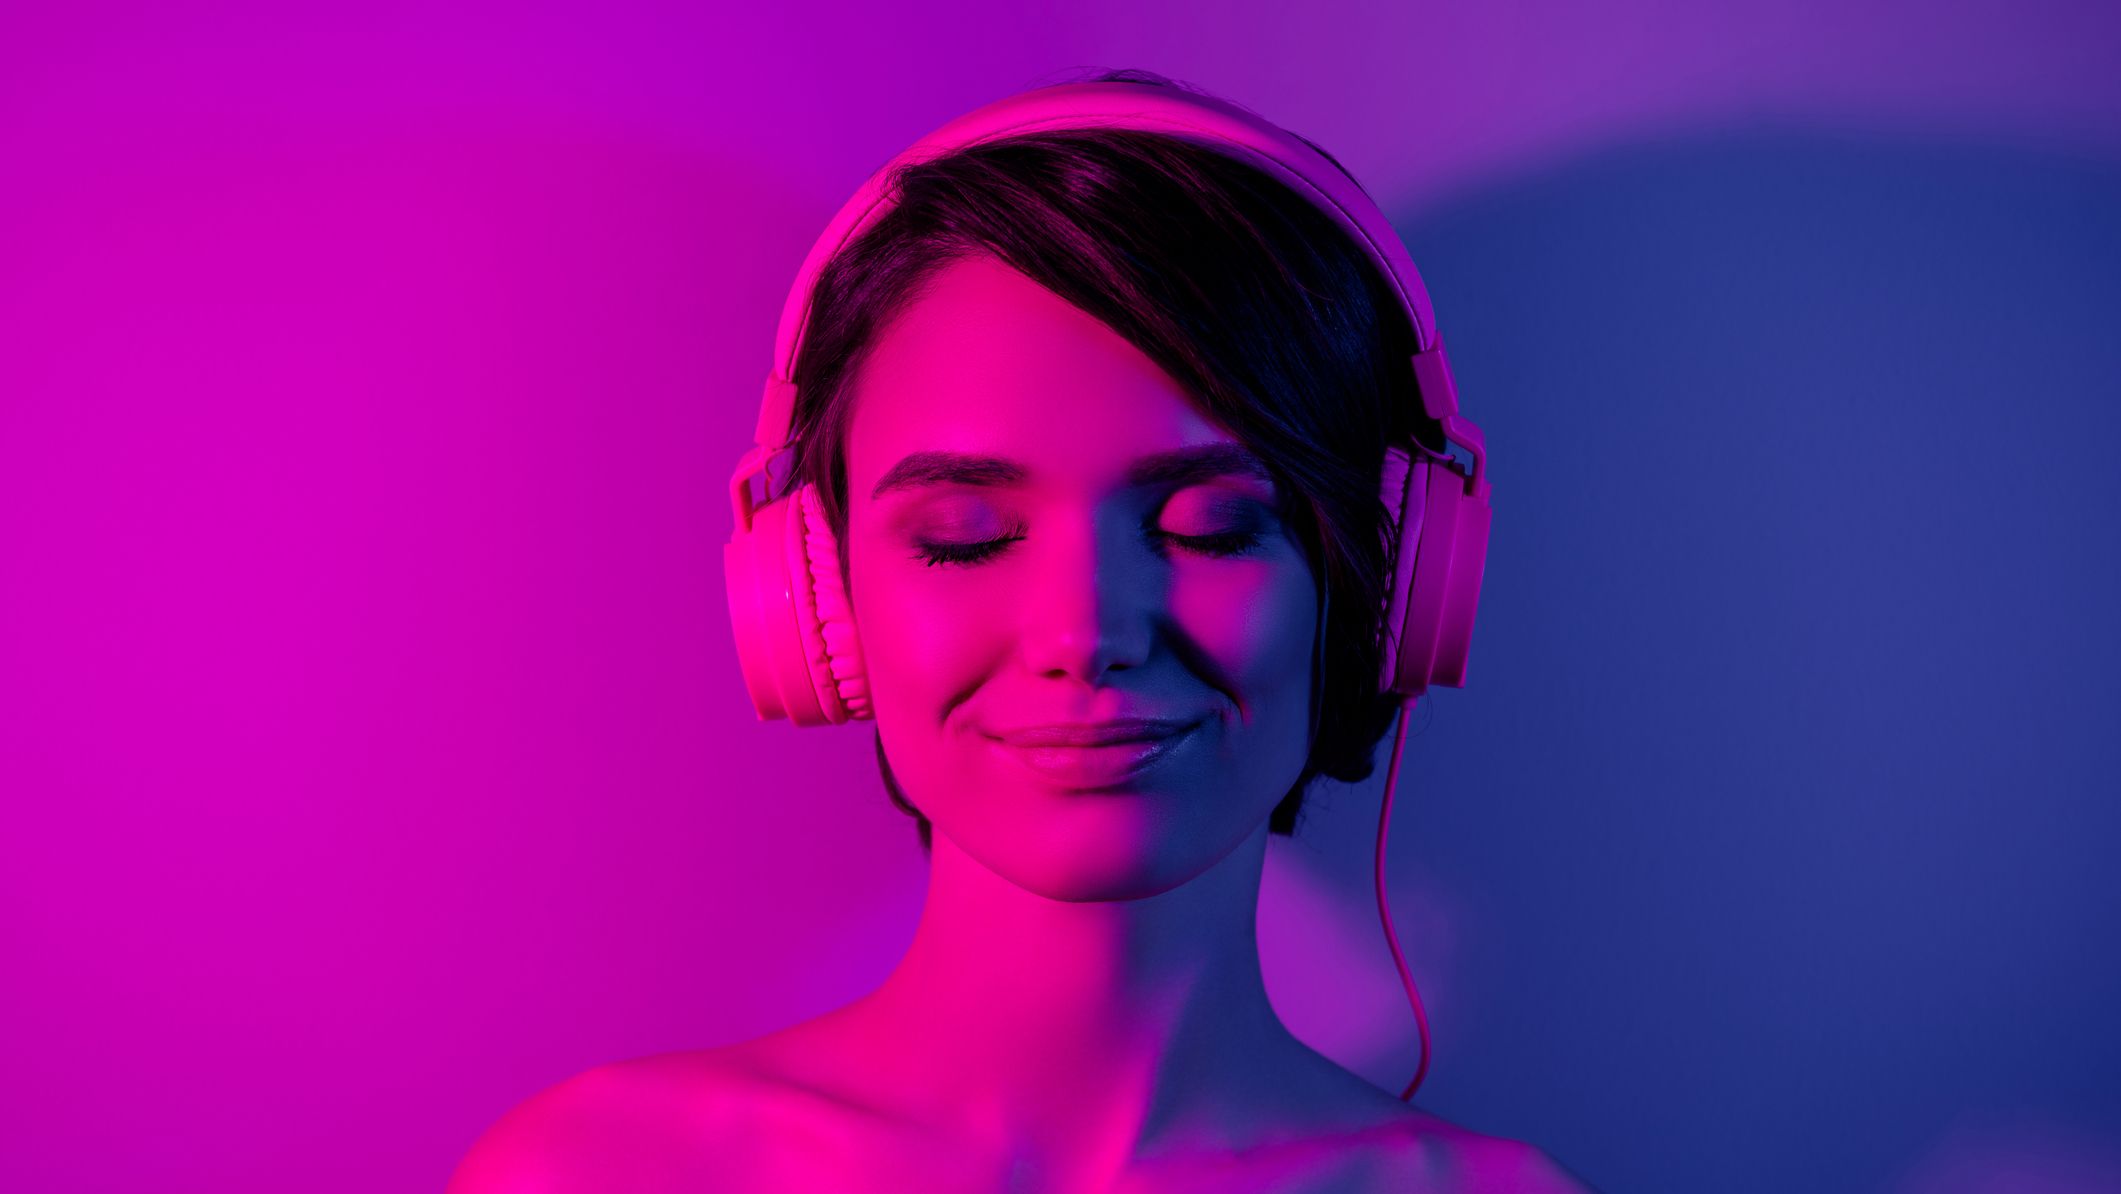 Live Nude Just For You - 15 Audio Porn Options and Podcasts